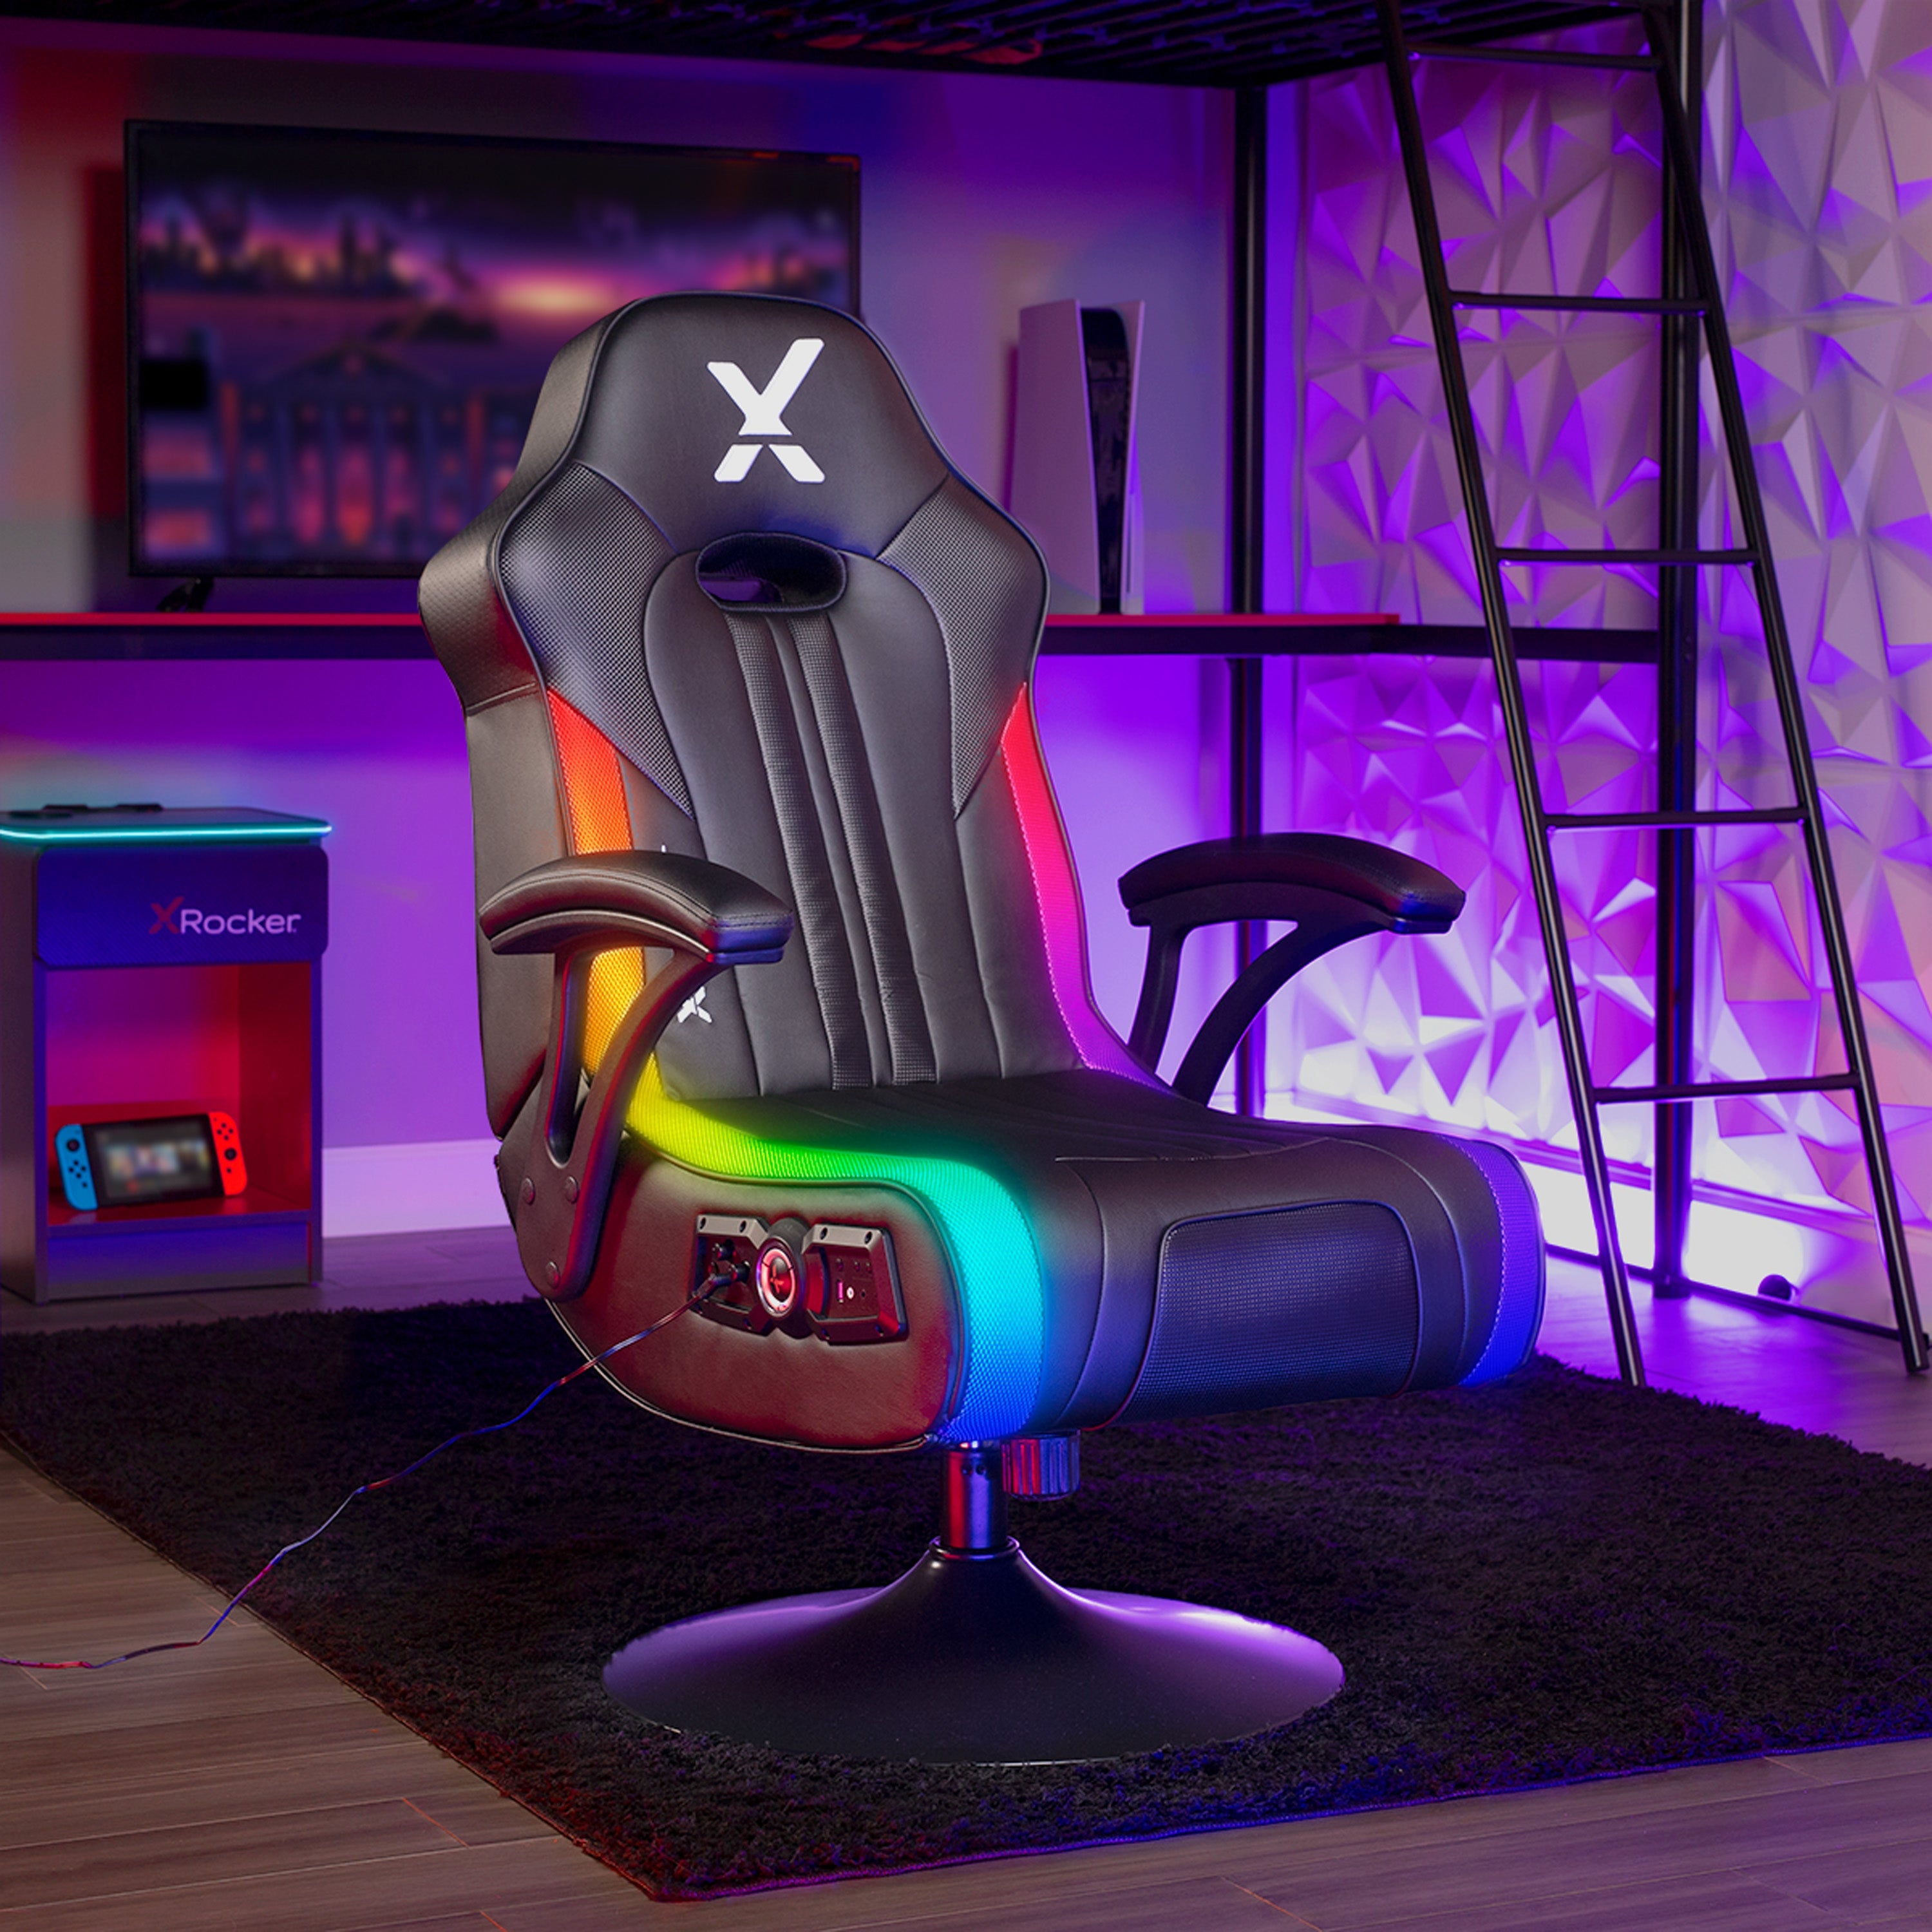 Torque RGB Audio Pedestal Gaming Chair with Subwoofer and Vibration, Black/RGB